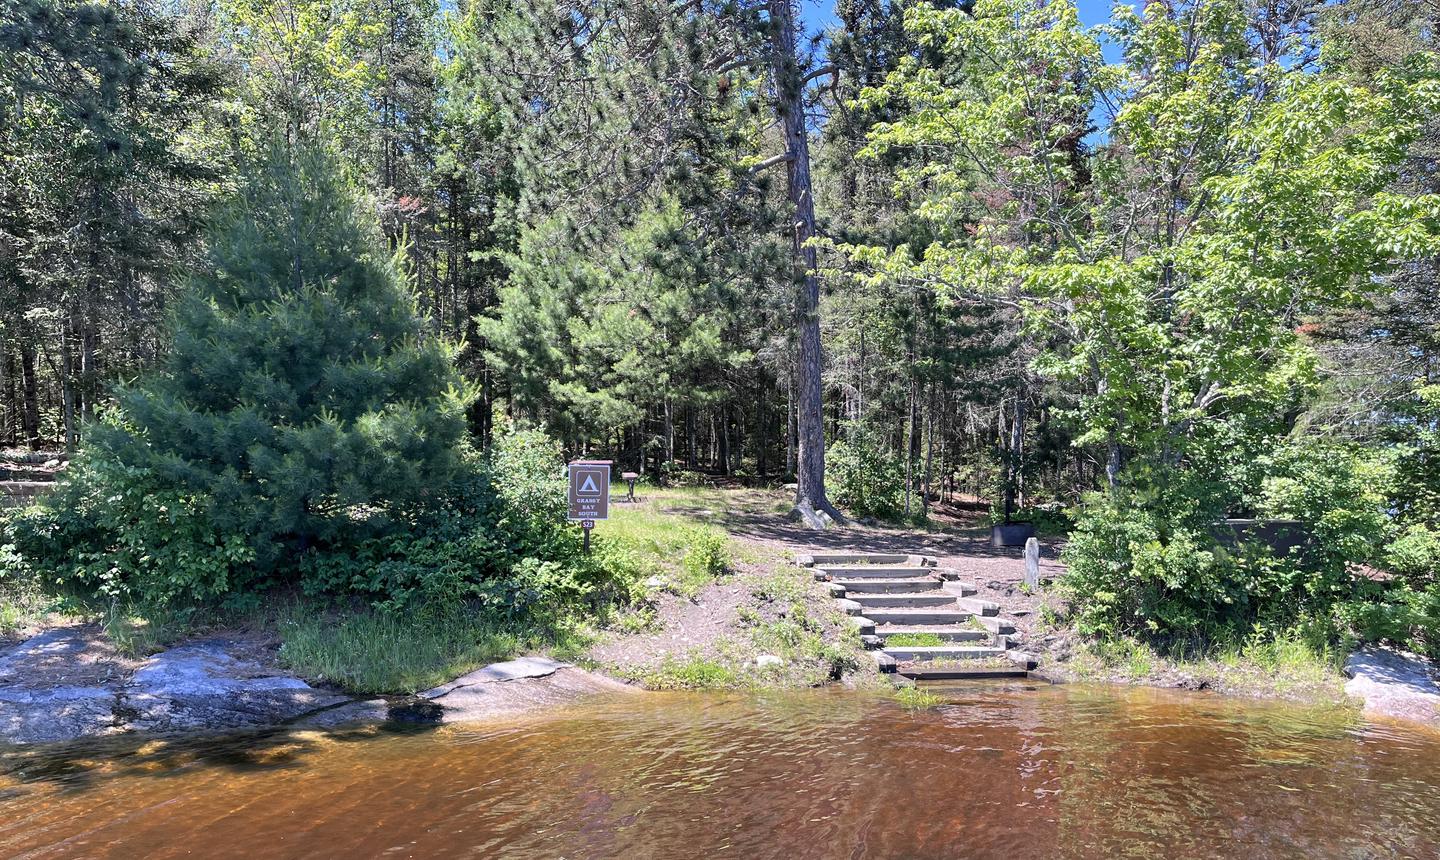 S23 - Grassy Bay South, view of boat access from water with stairs leading down to the shoreline and the campsite sign and mooring post on shoreView of campsite from the water